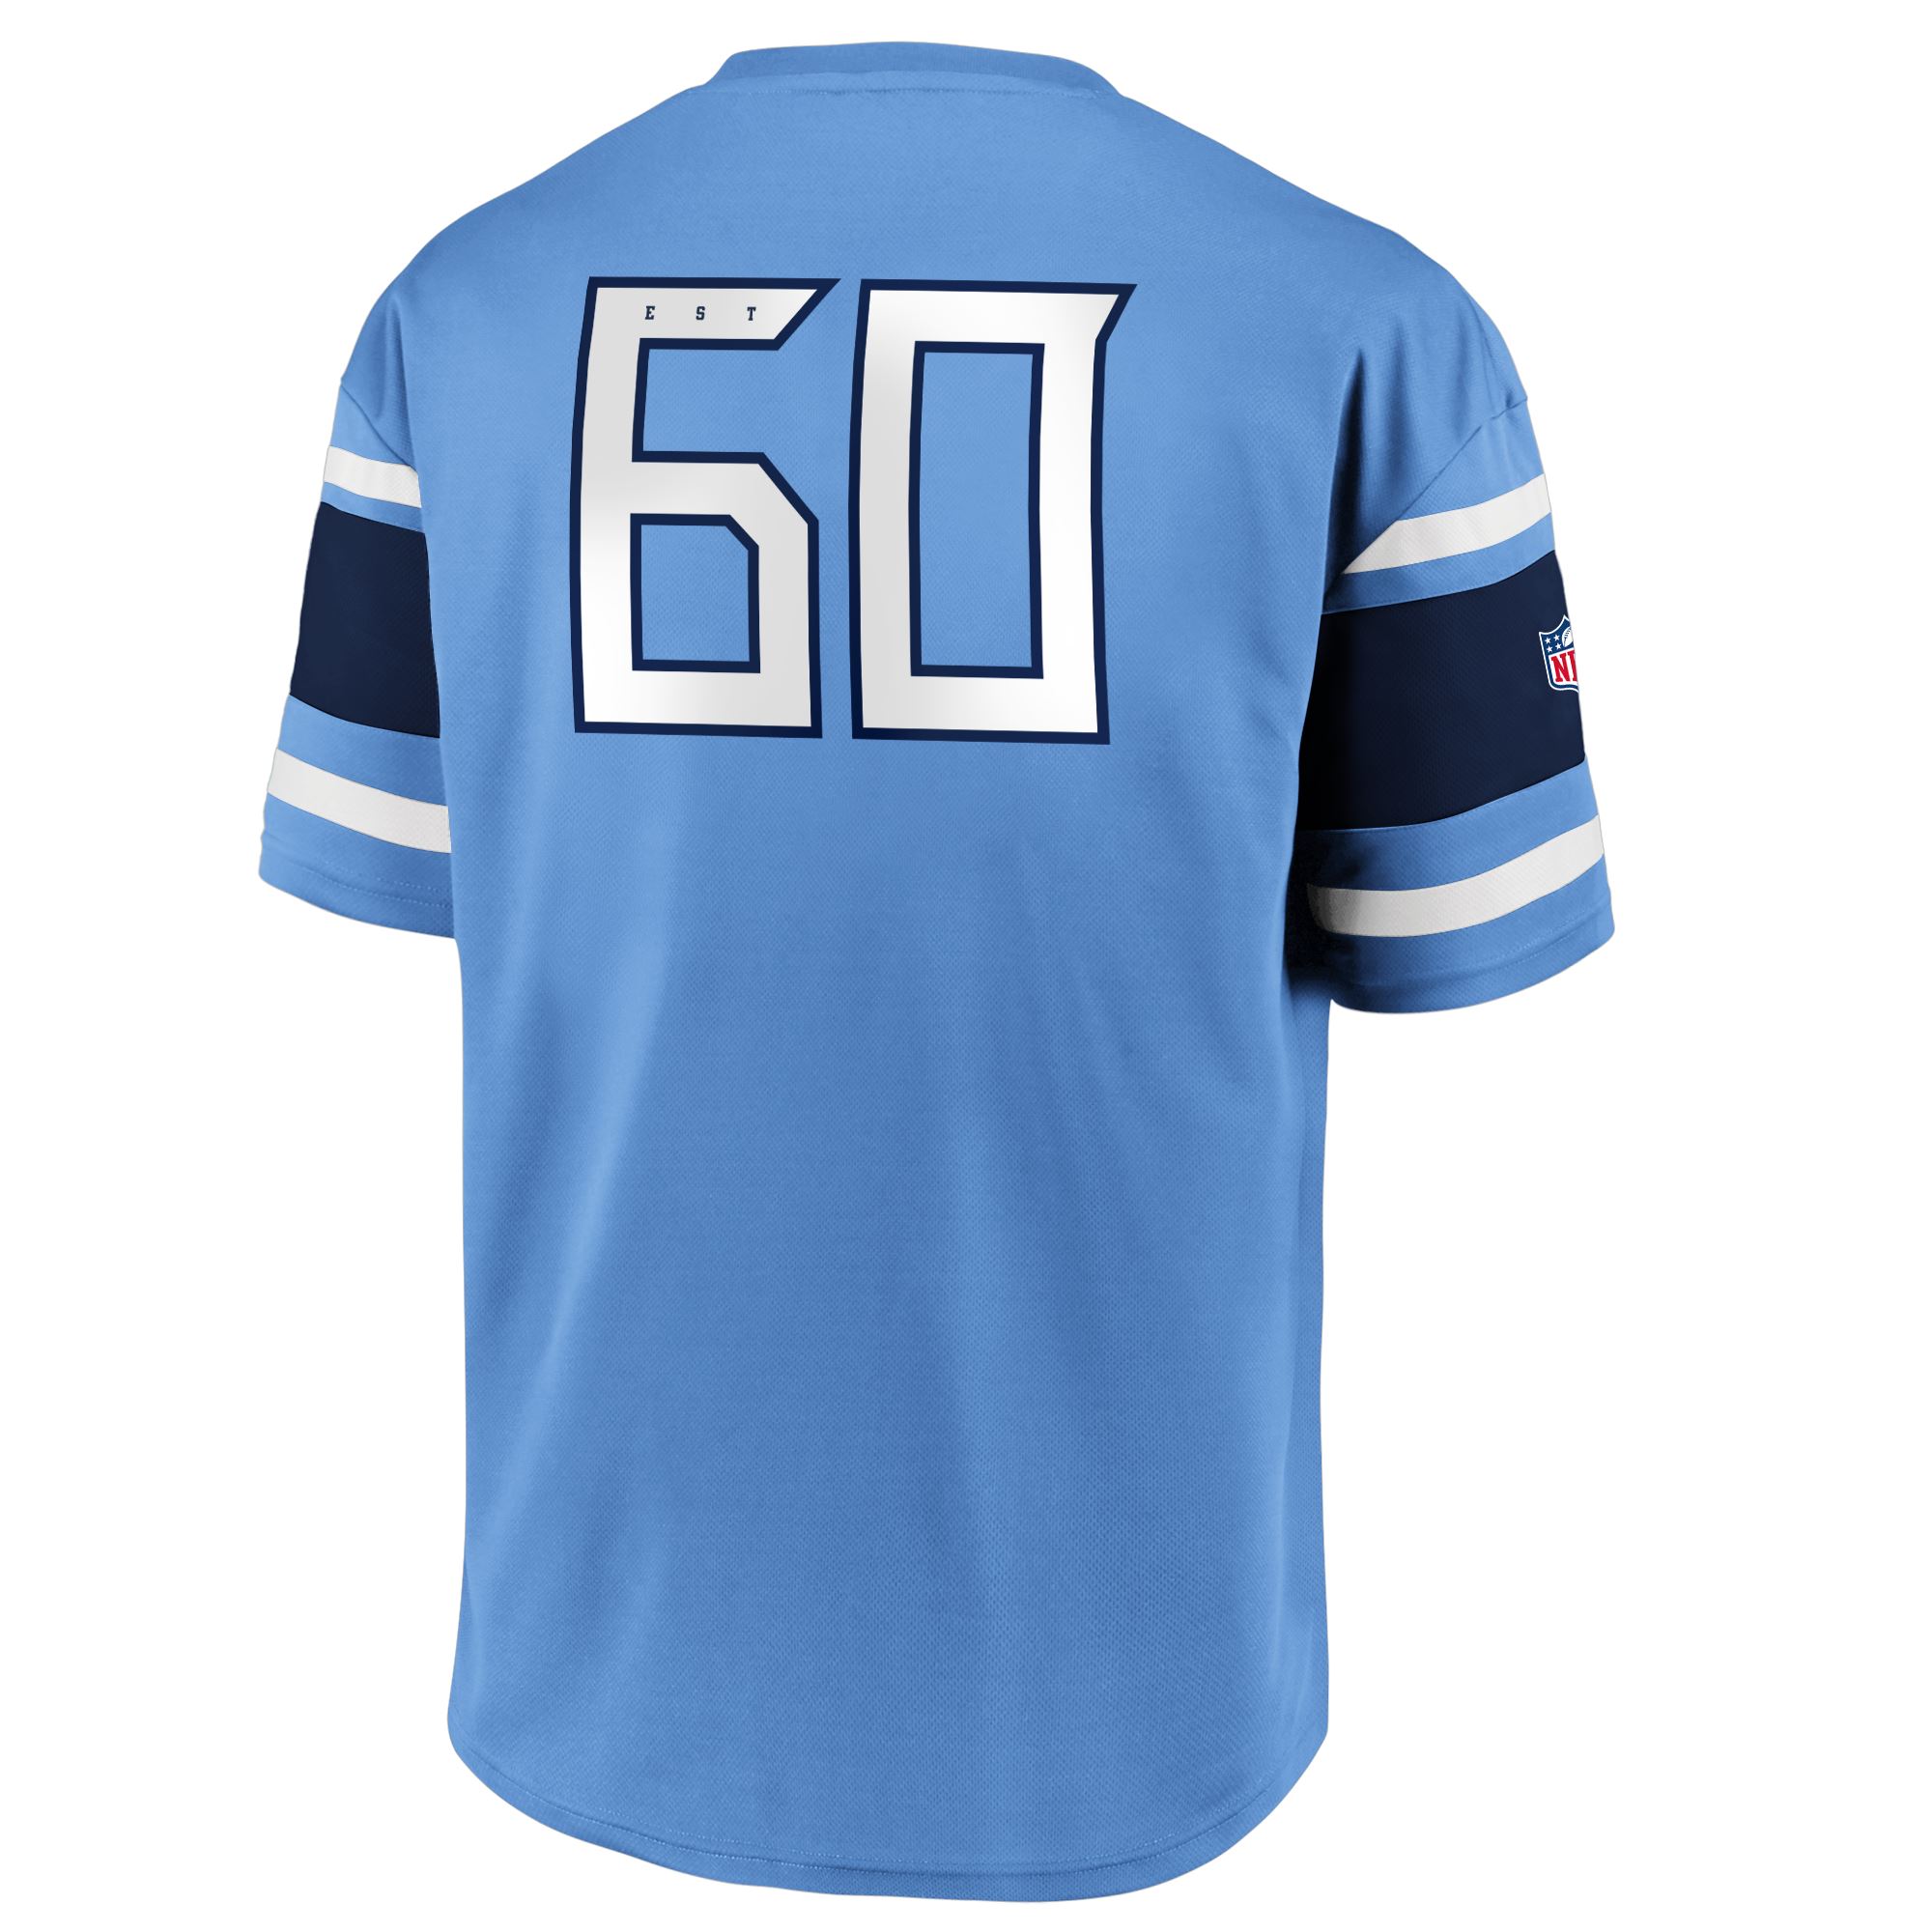 Tennessee Titans NFL Supporters Jersey Fanatics